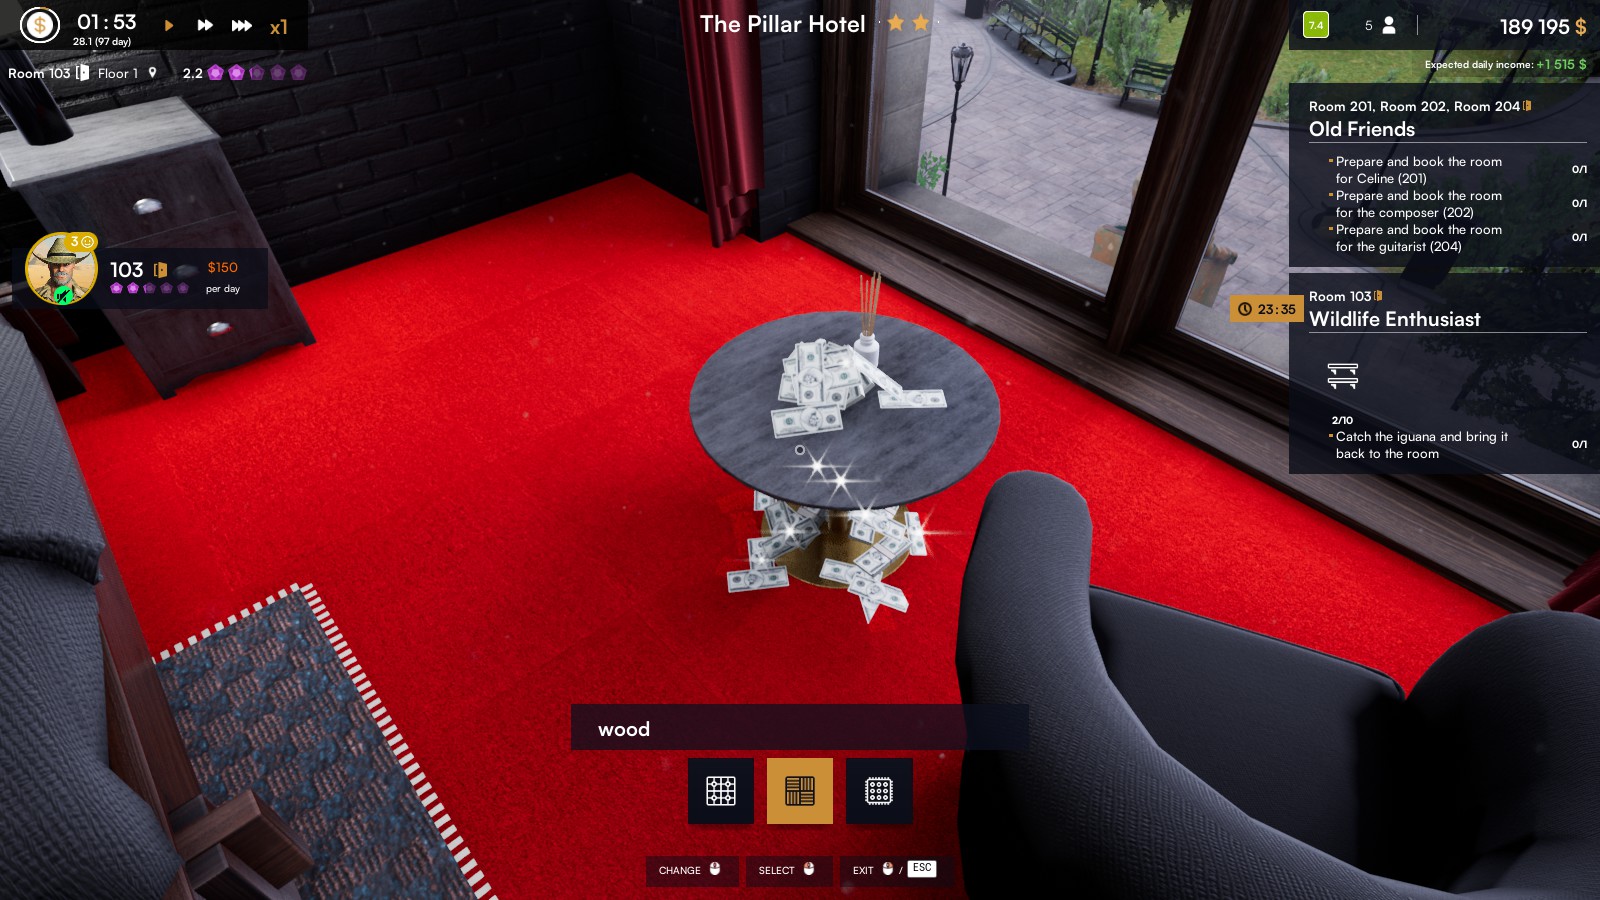 A table holding a small pile of bills that have also fallen onto the floor and is shining. A bright red carpet helps make the black furniture stand out next to a closed window.